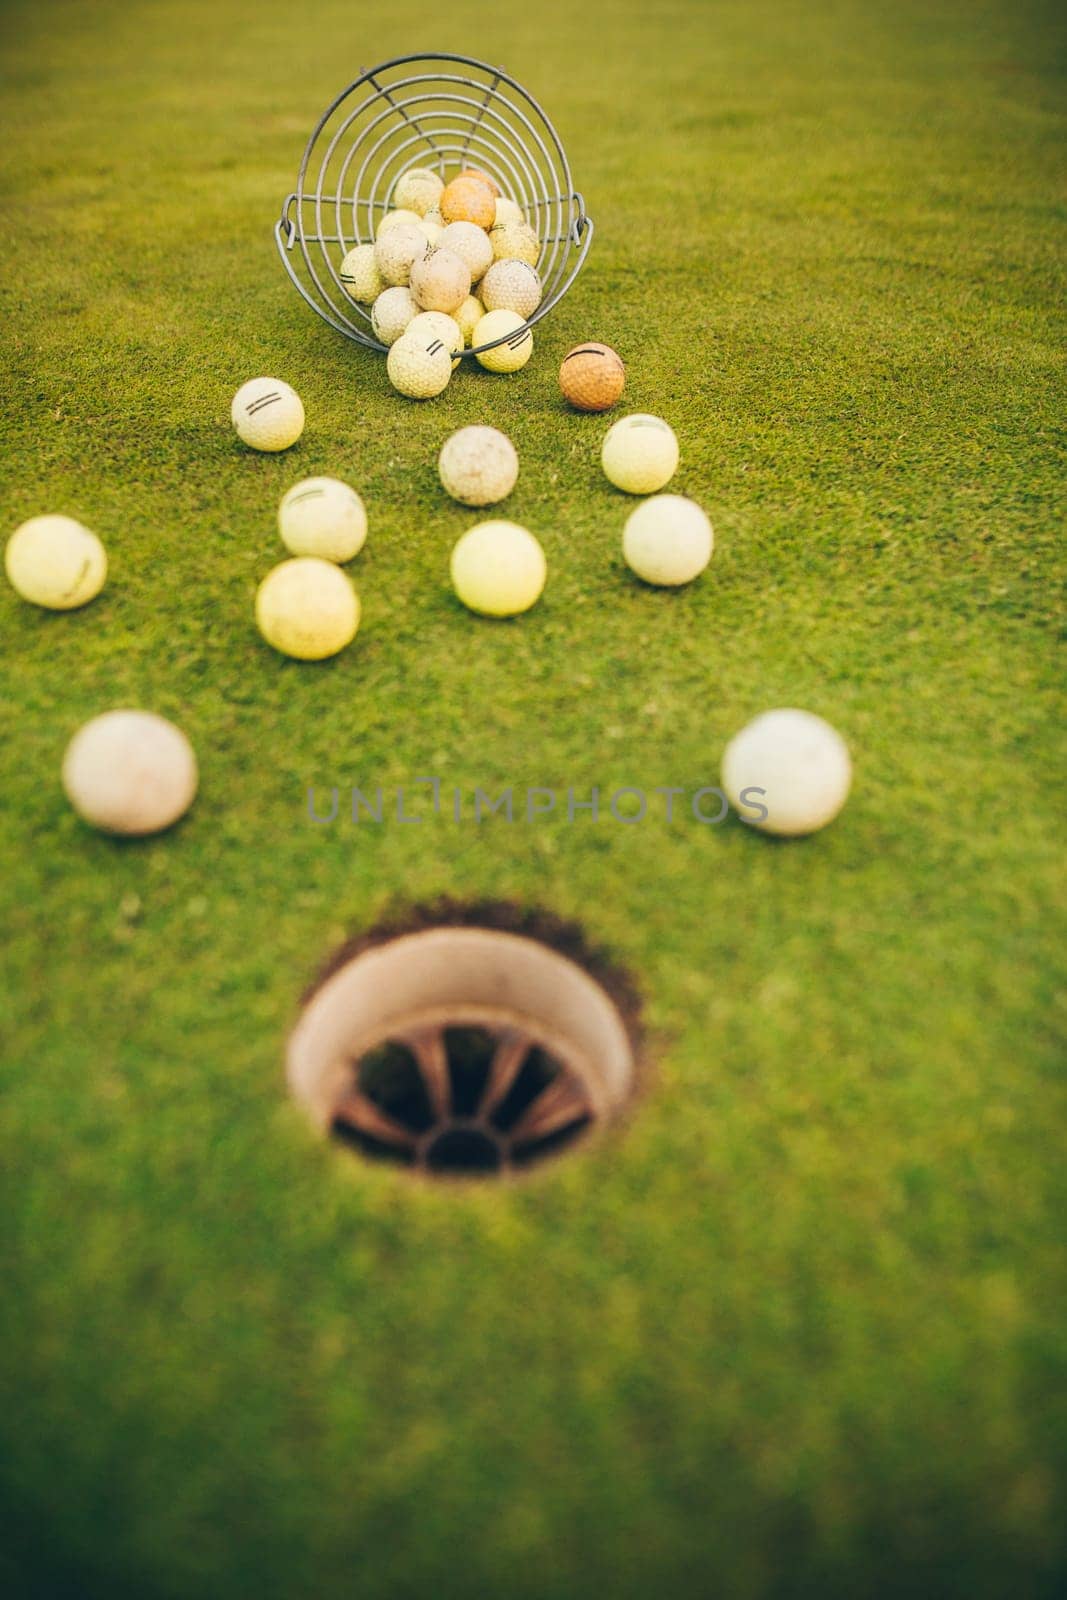 Close up of golf club and balls by the hole on a grass yard, sport concept